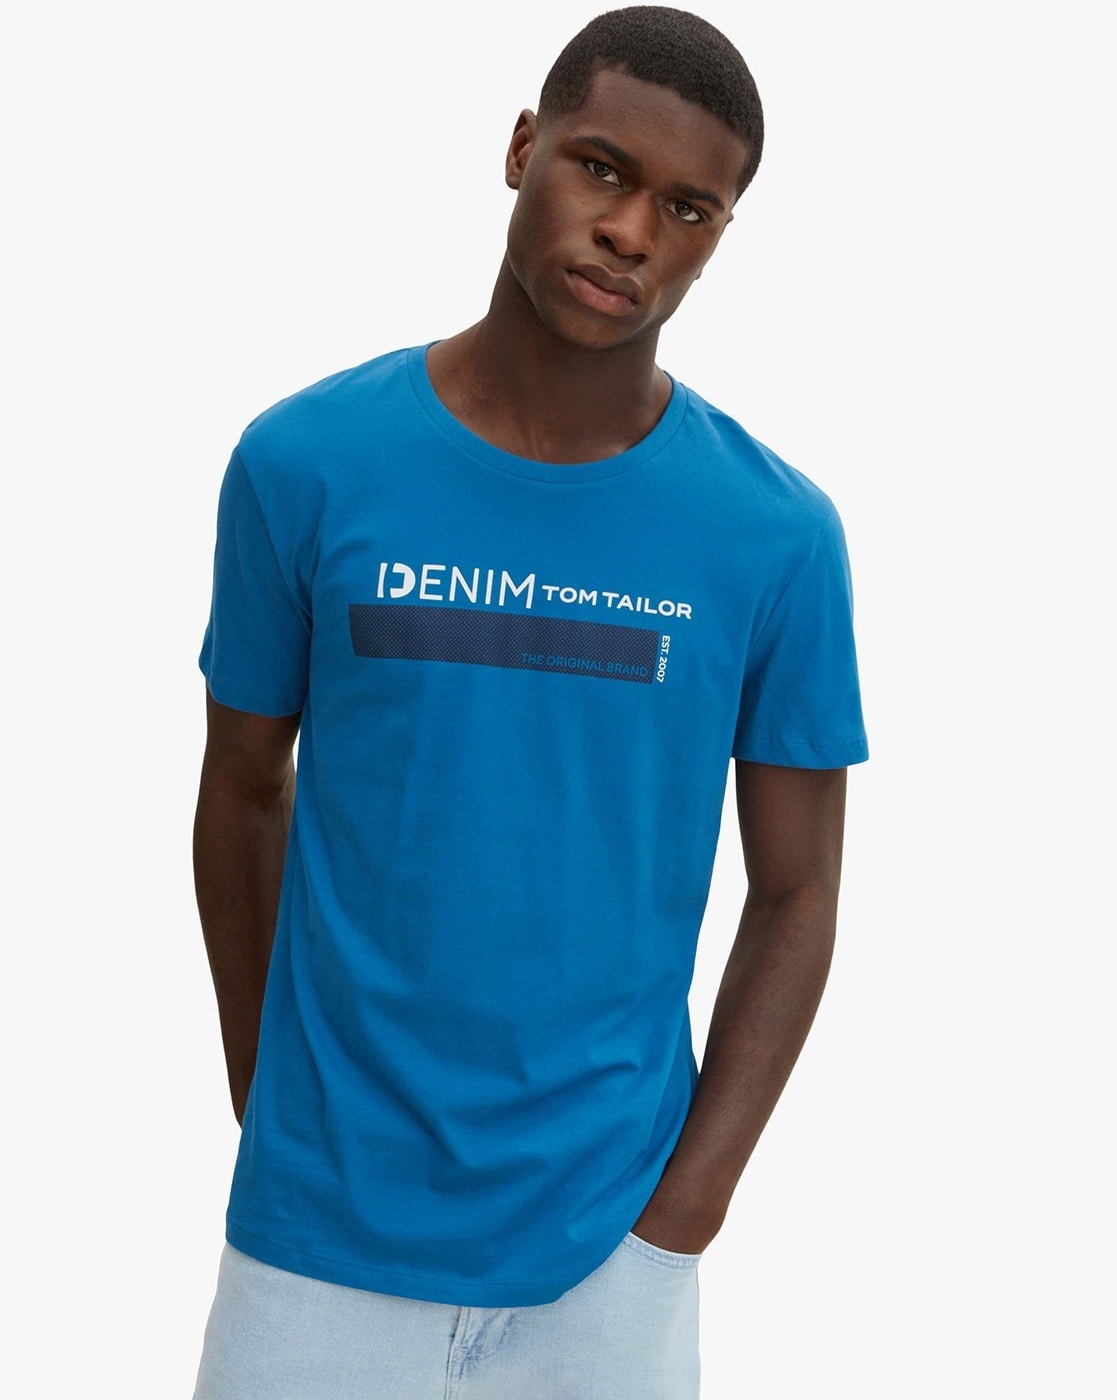 Tom Tshirts by Men Online Tailor Blue for Buy